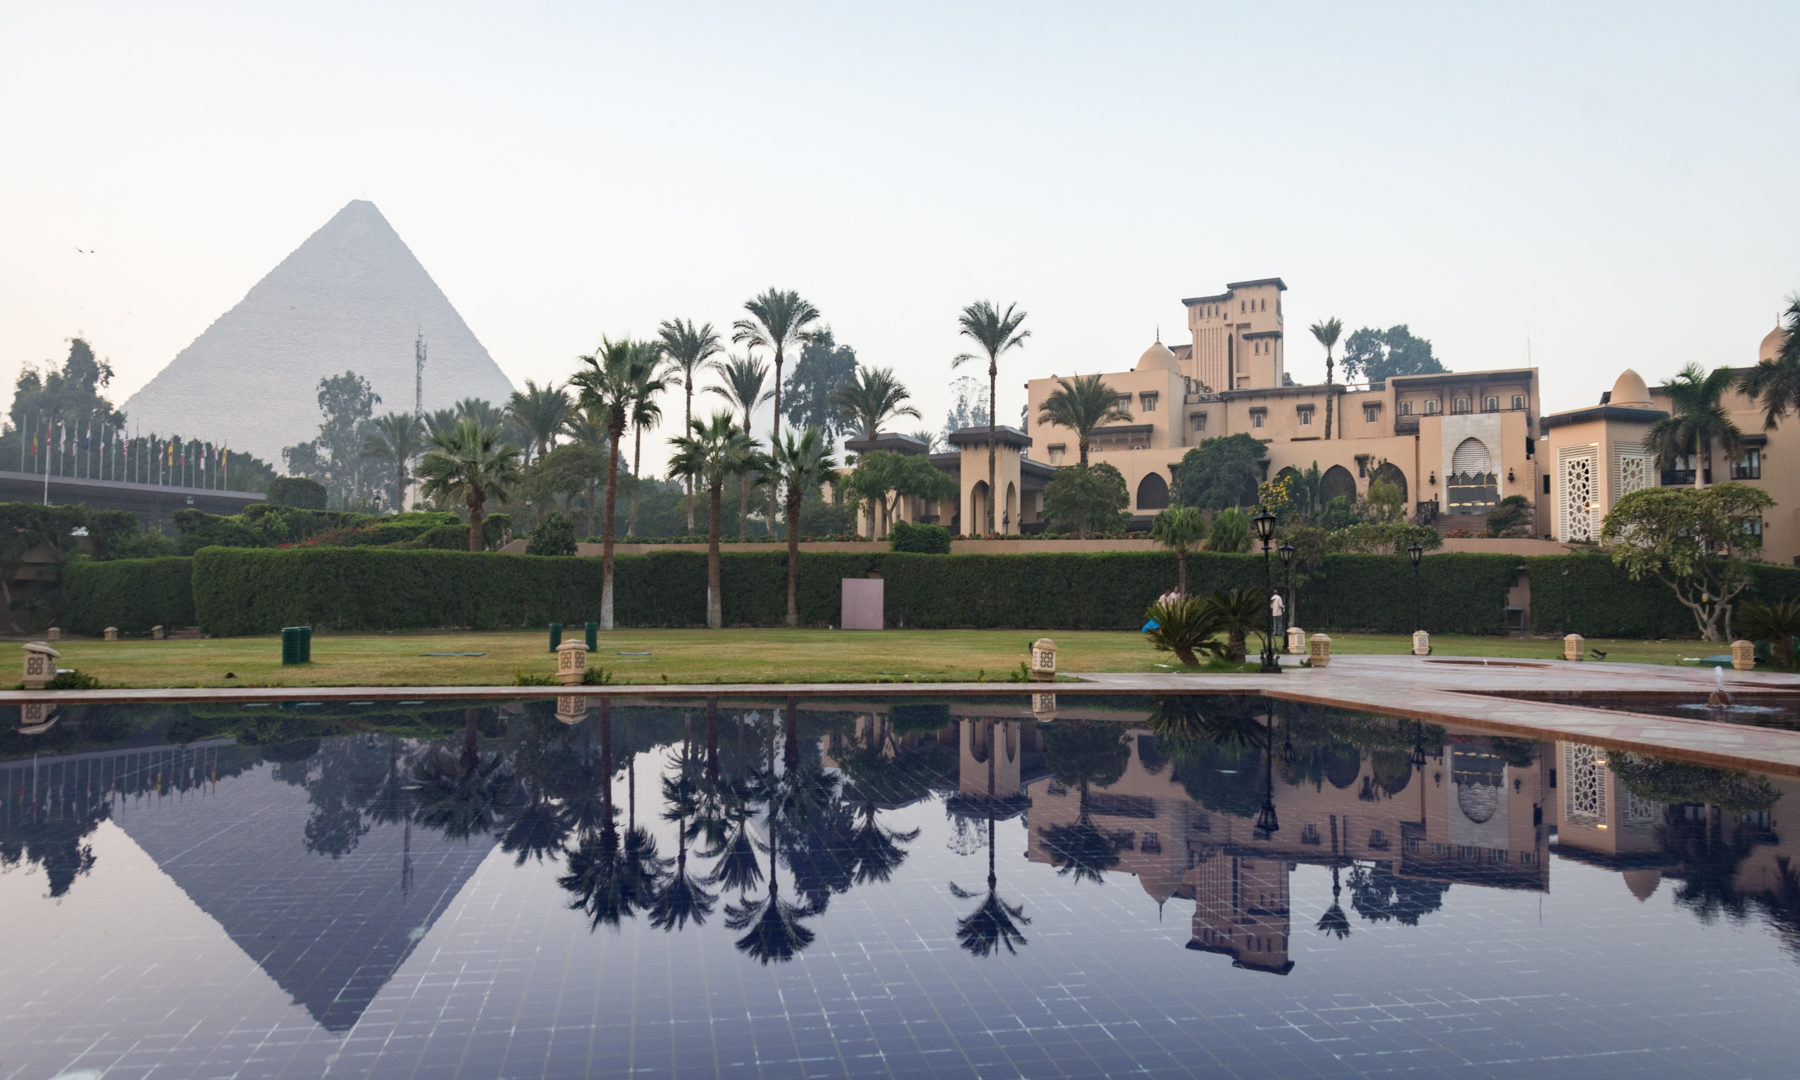 Best Hotels Near the Great Pyramids of Giza, Egypt